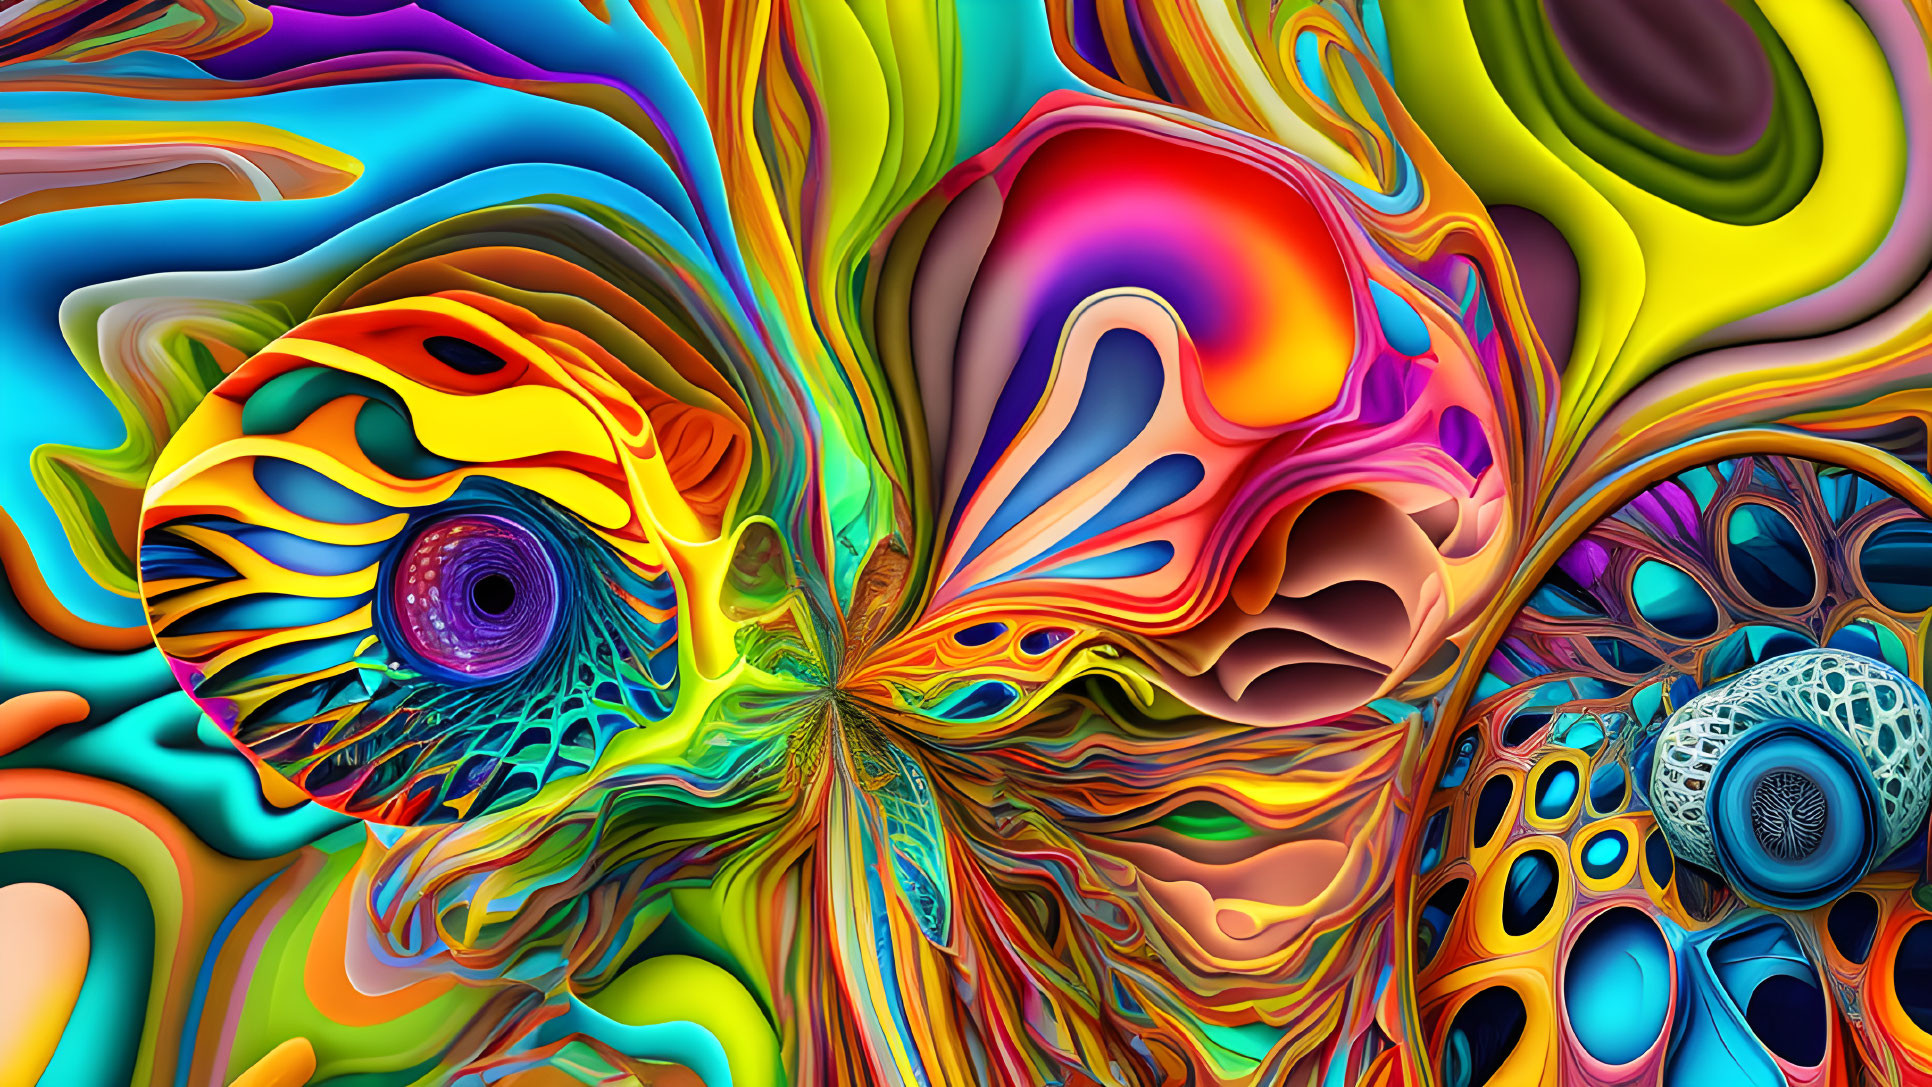 Colorful Abstract Digital Art with Psychedelic Swirls & Patterns